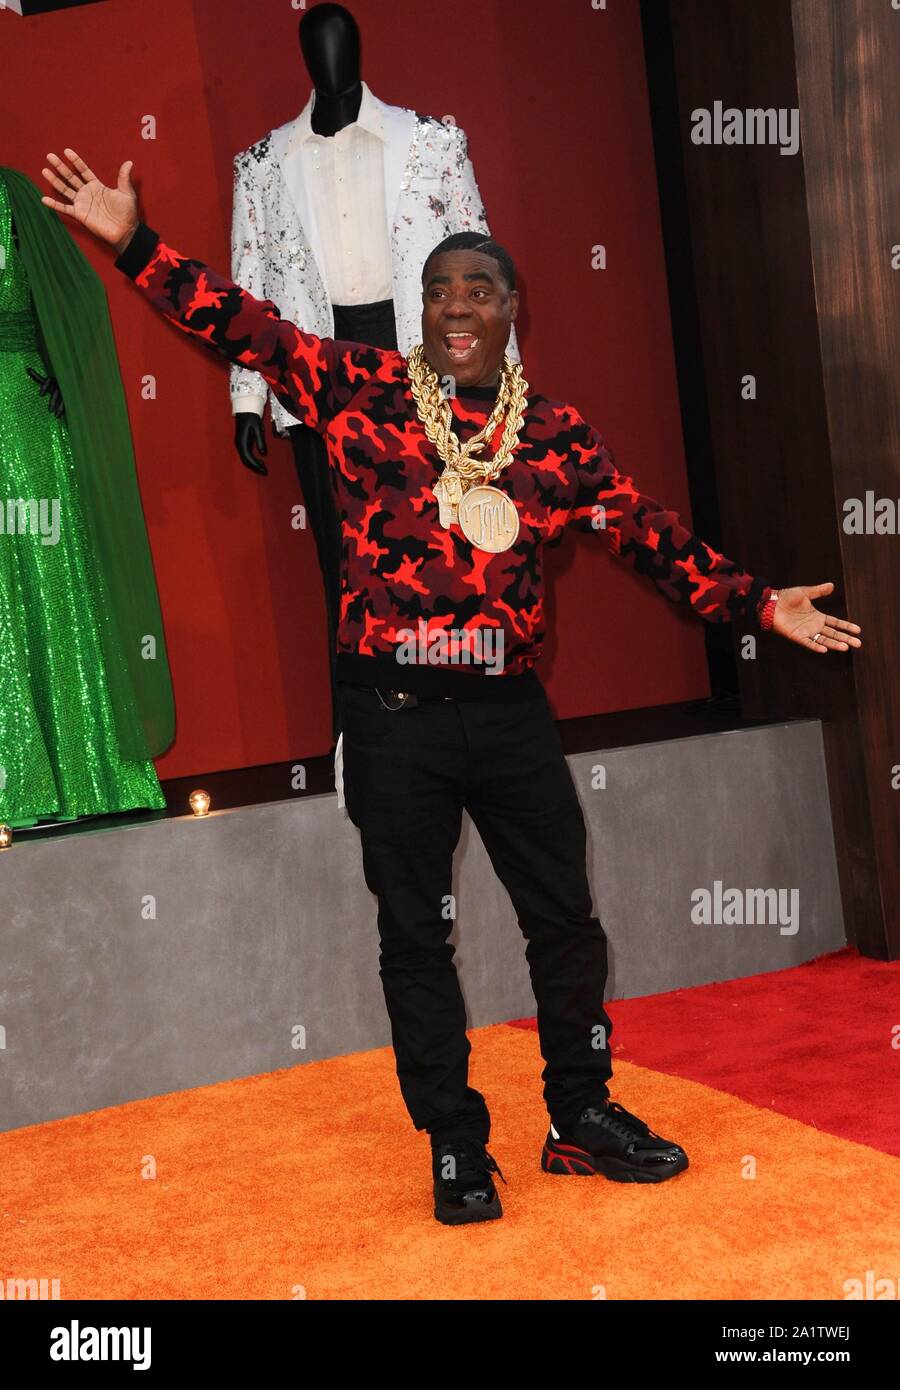 Los Angeles, USA. 28th Sep, 2019. Tracy Morgan at arrivals for DOLEMITE IS MY NAME Premiere, Regency Village Theatre - Westwood, Los Angeles, CA September 28, 2019. Credit: Elizabeth Goodenough/Everett Collection/Alamy Live News Stock Photo